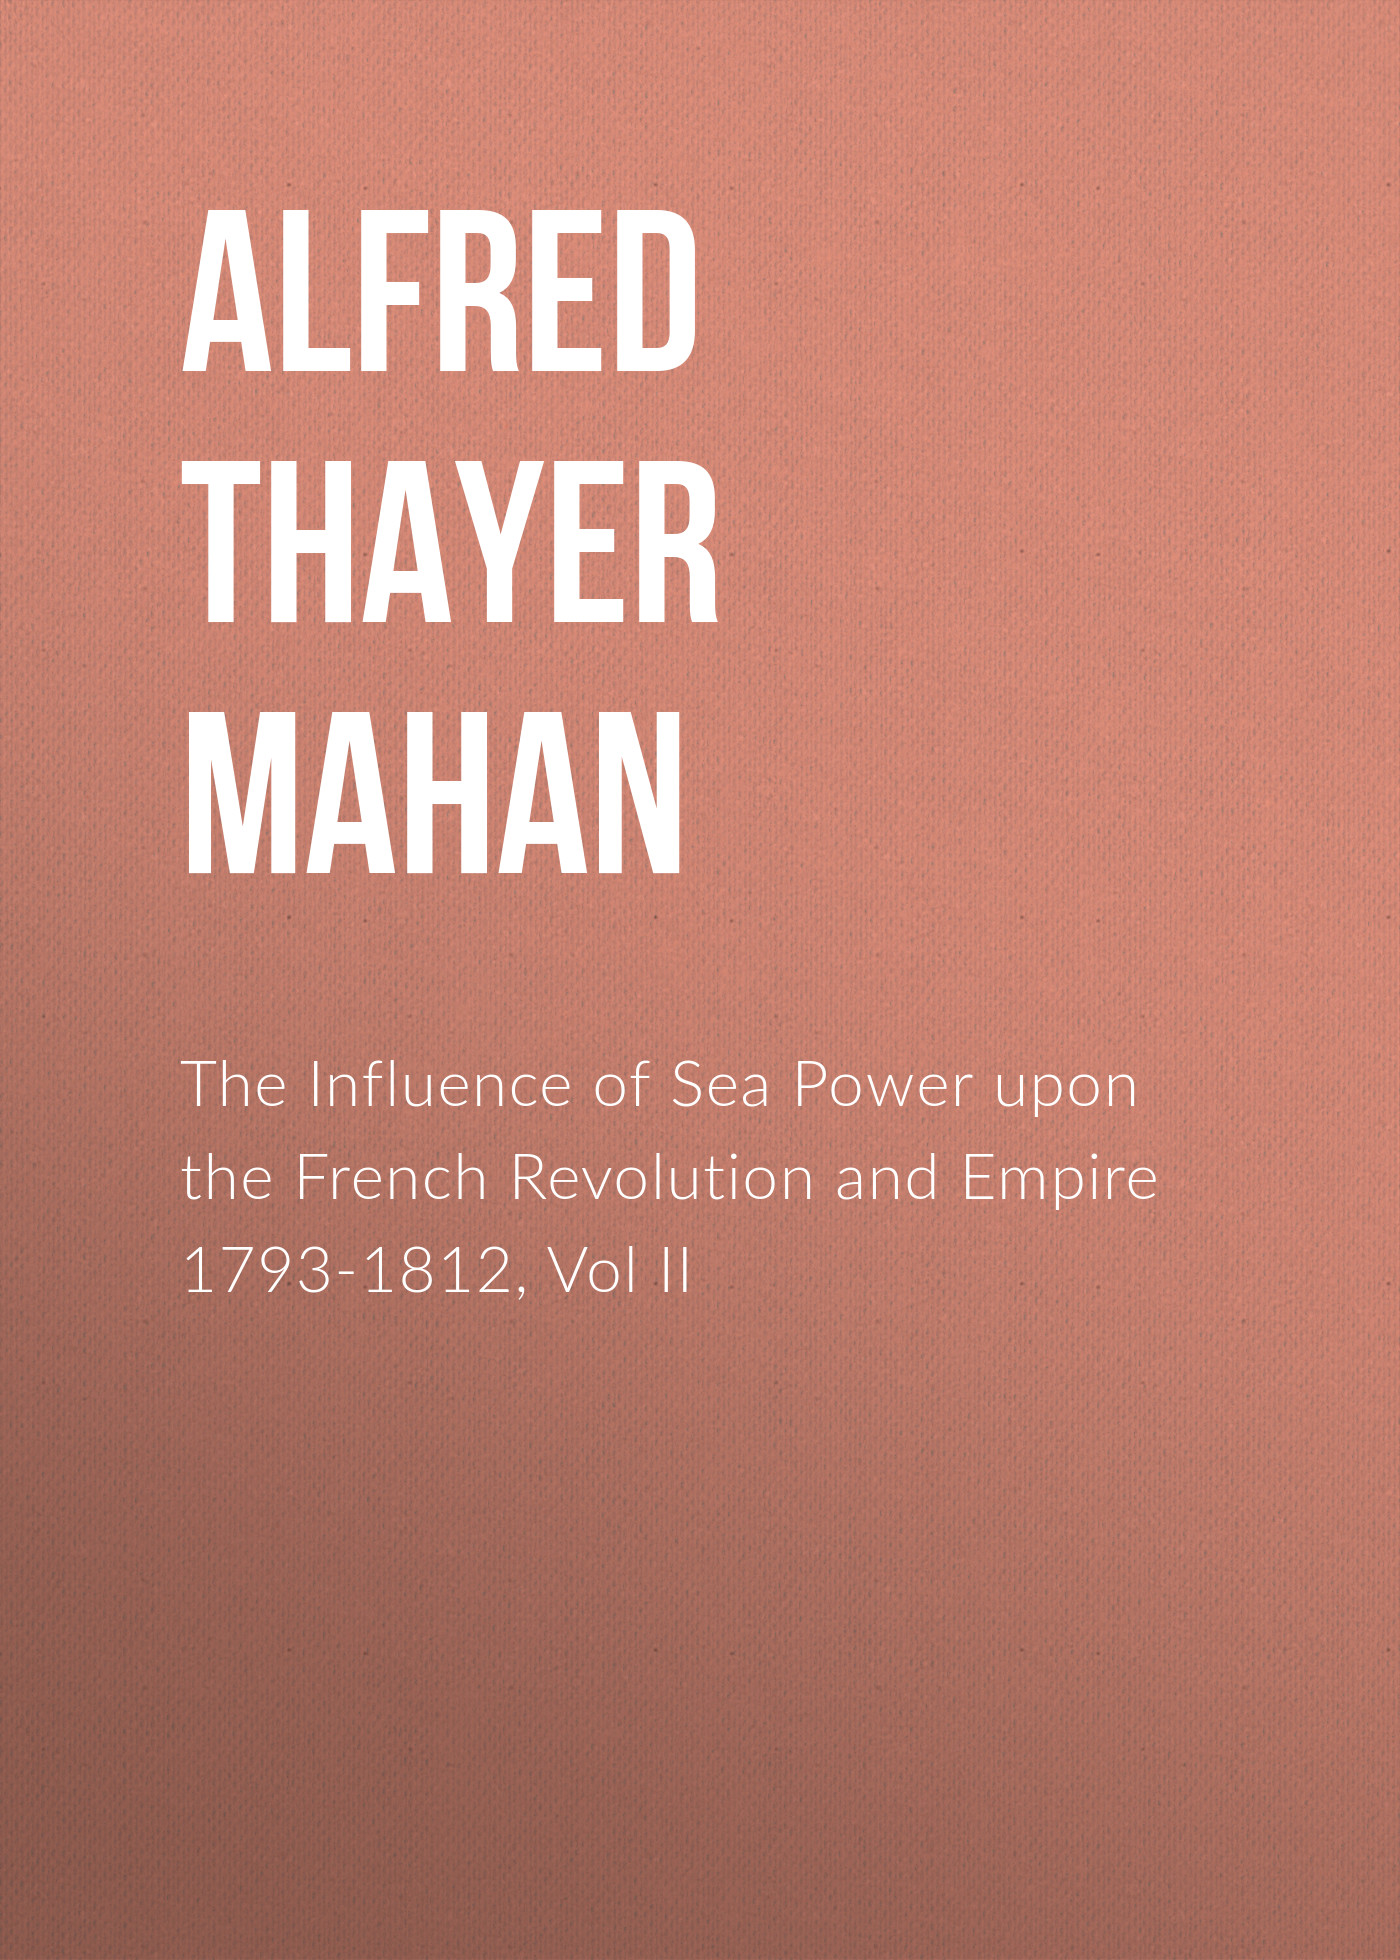 The Influence of Sea Power upon the French Revolution and Empire 1793-1812, Vol II